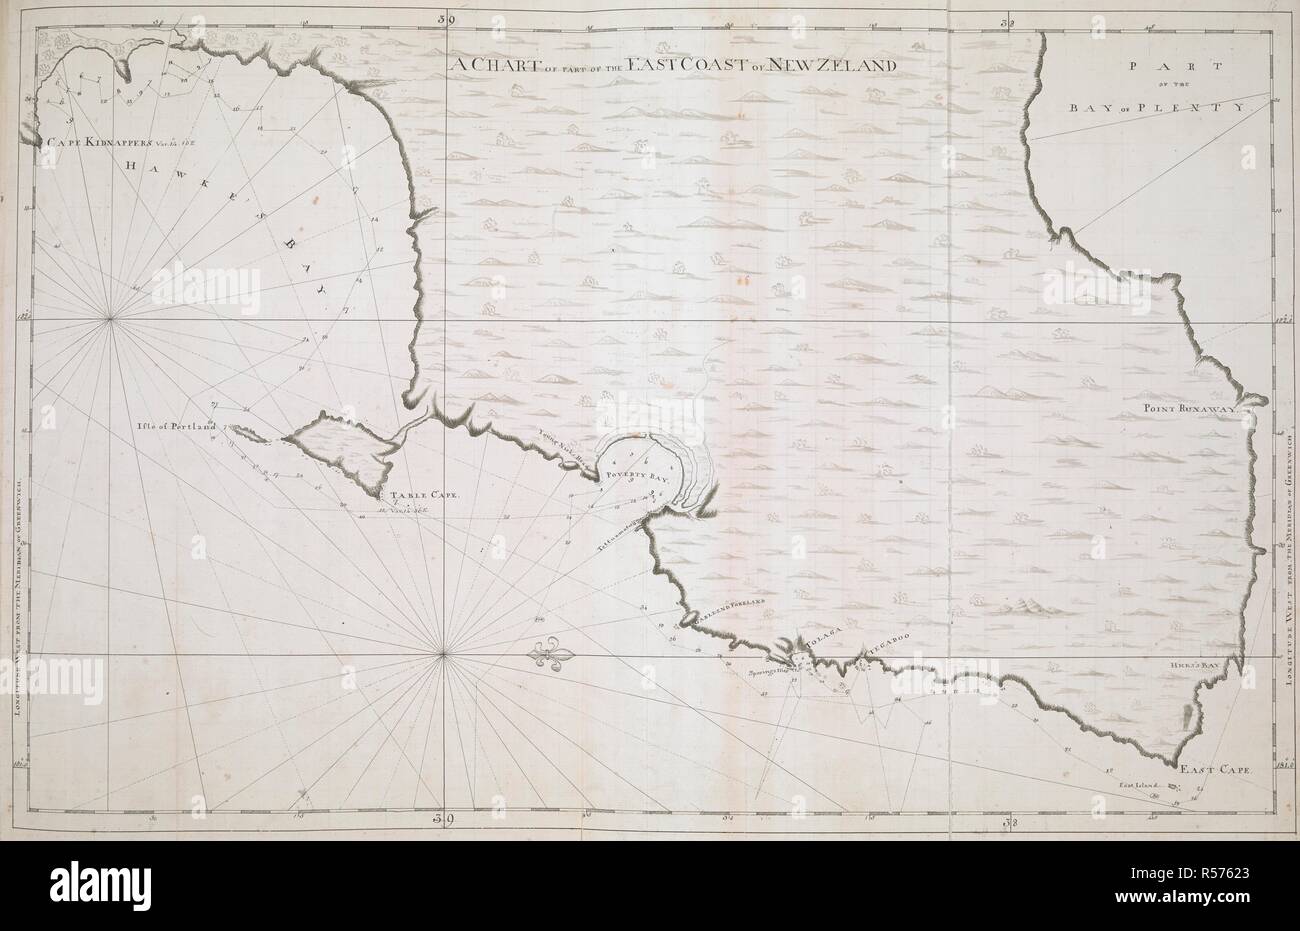 A chart of part of the south-eastern coast of the North Island of New Zealand, from Cape Runaway to Cape Kidnappers; drawn by Lieut. James Cook, shewing his track in 1769-1770. Charts, Plans, Views, and Drawings taken on board the Endeavour during Captain Cook's First Voyage, 1768-1771. 1769-1770. Ms. 2 f. 4 1/2 in. x 1 f. 6 1/2 in.; 72 x 47 cm. Source: Add. 7085, No.18. Stock Photo